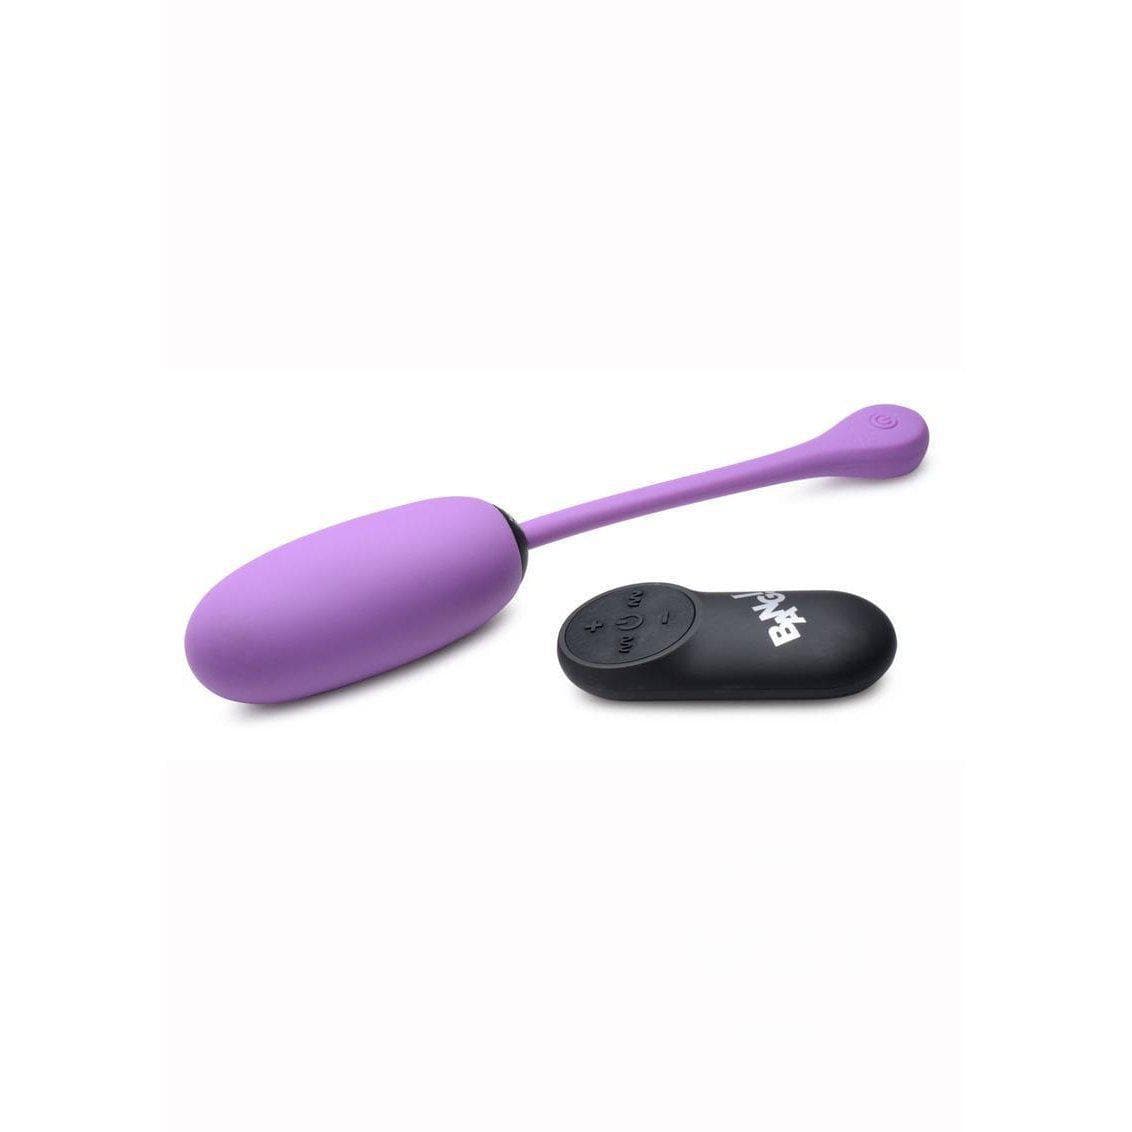 Bang! 28 Function Plush Silicone Rechargeable Egg With Remote Control - Romantic Blessings